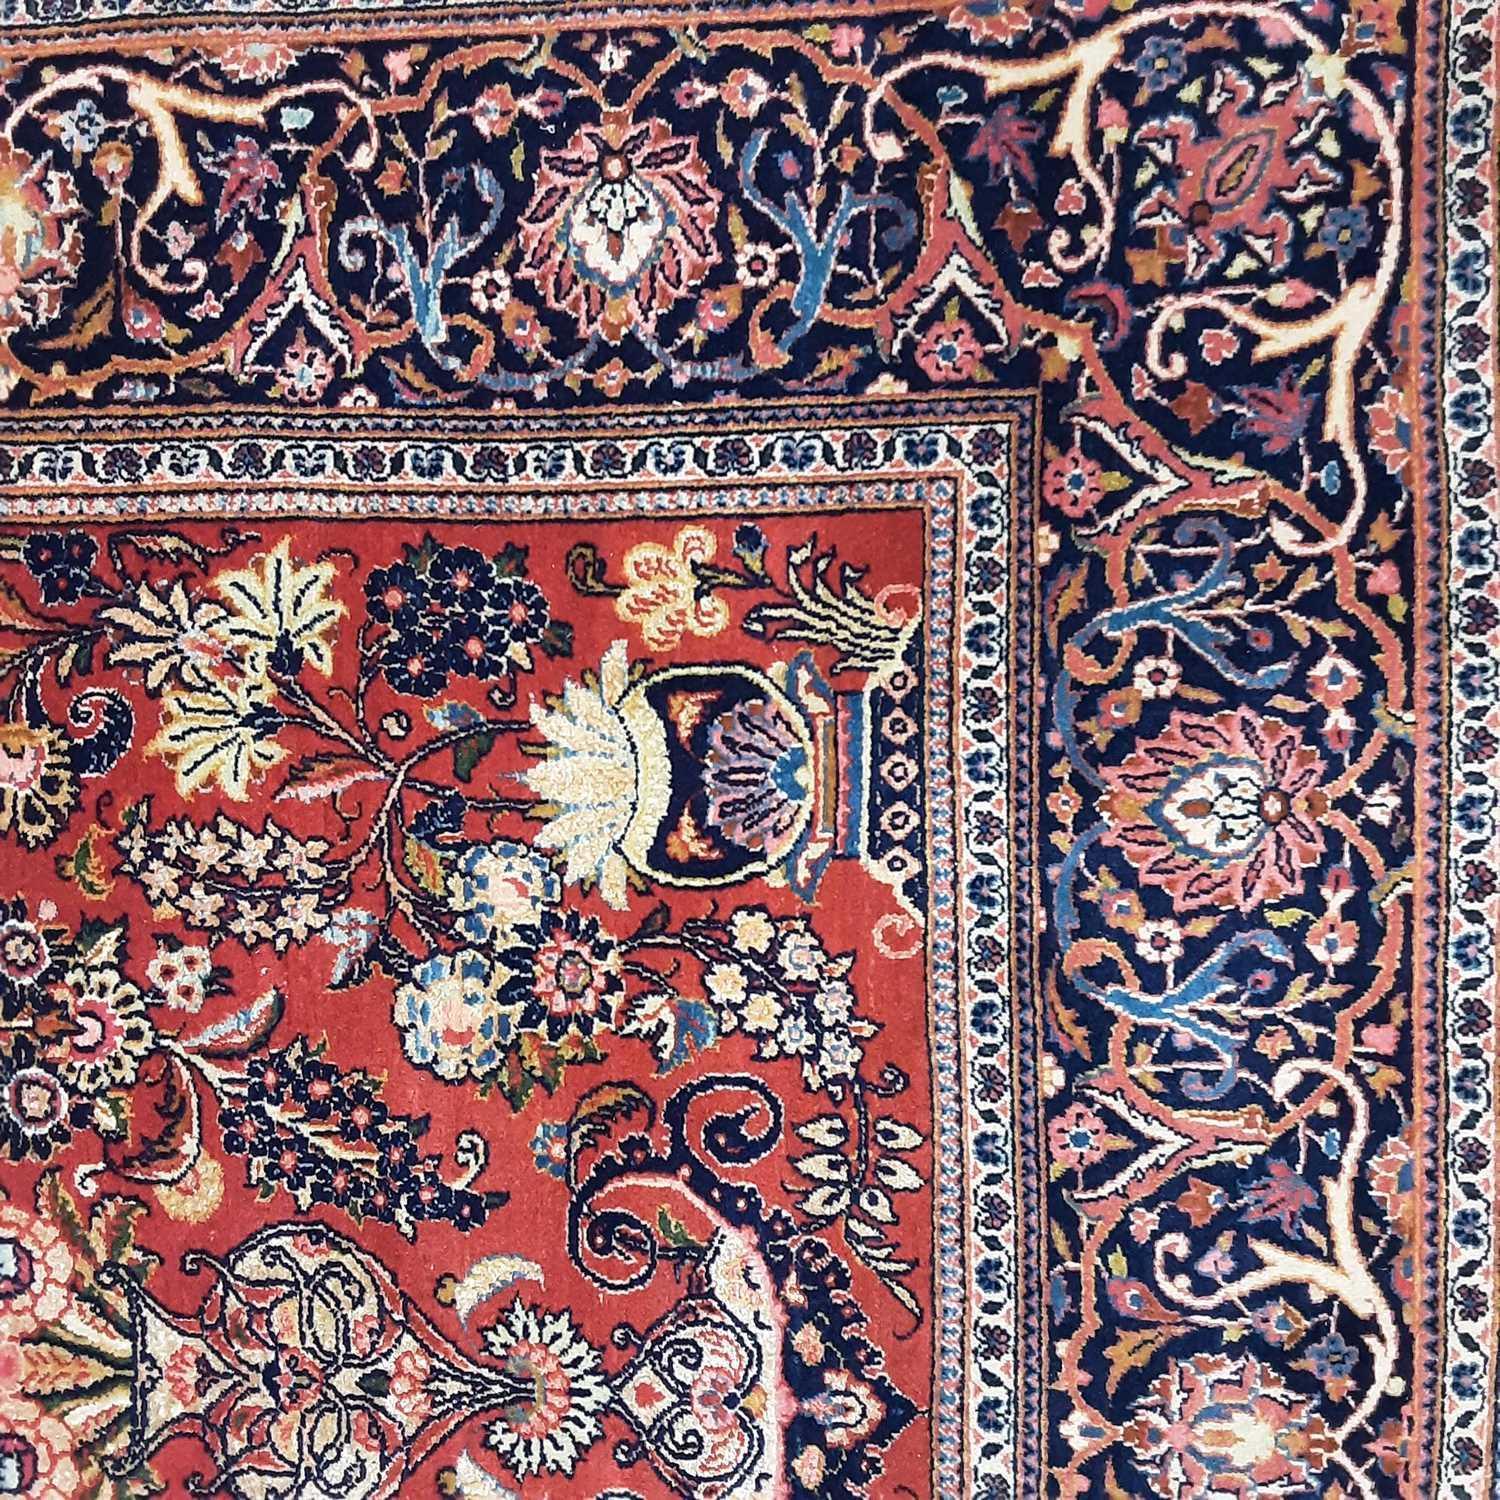 KASHAN PART SILK RUG LATE 19TH/EARLY 20TH CENTURY